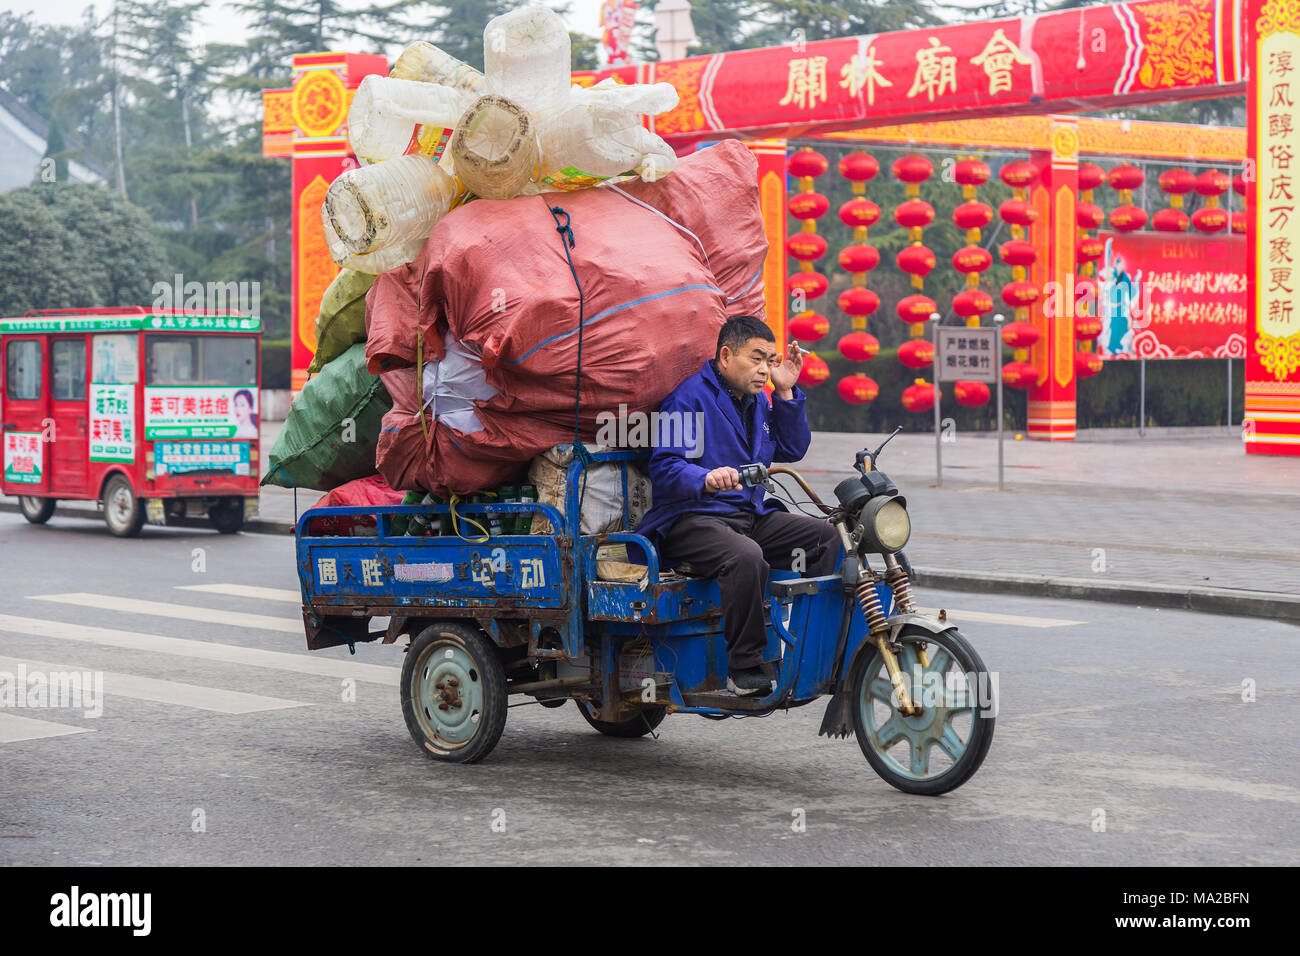 Luoyang, China - 7 March 2018 - Chinese man rides his three wheeled motorbike truck carrying lots of containers on a street of Luoyang, China on March Stock Photo